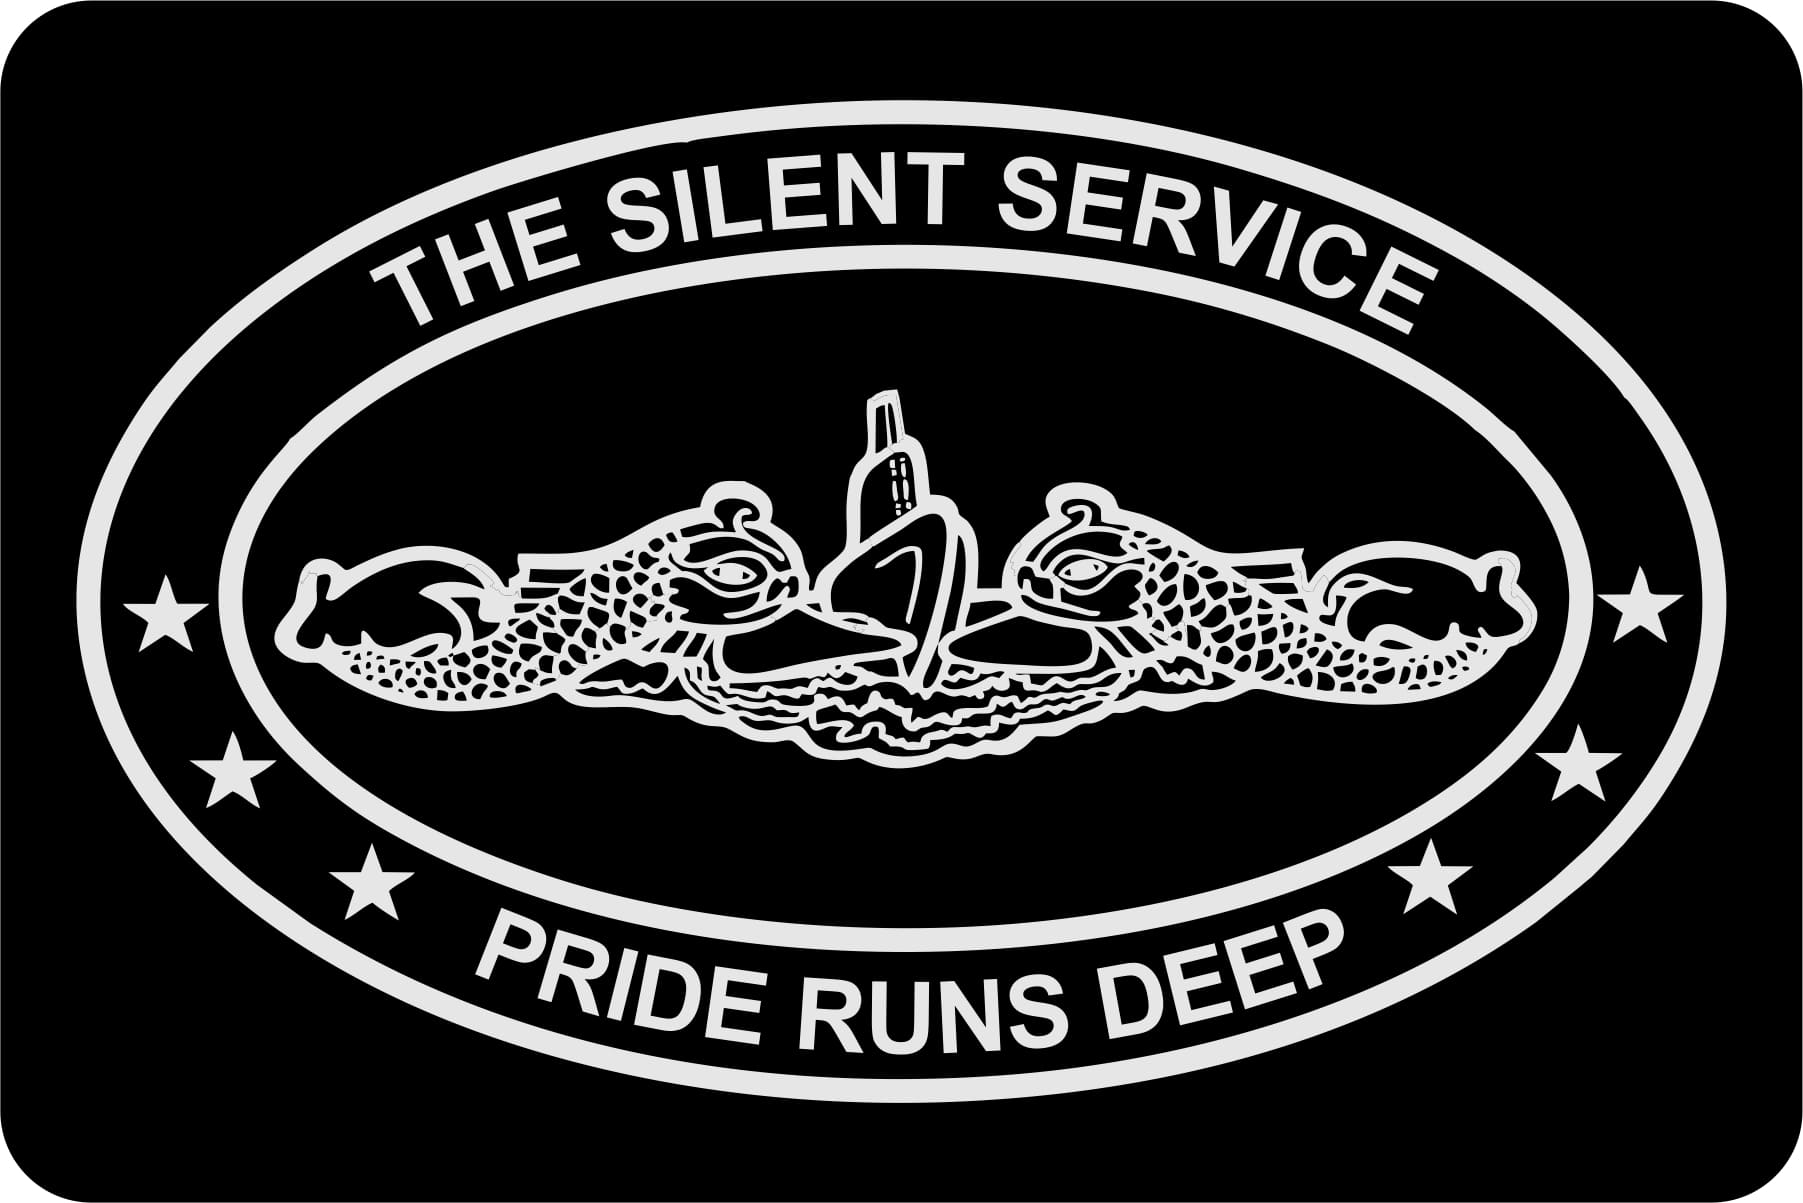 THE SILENT SERVICE - Tow Hitch Cover